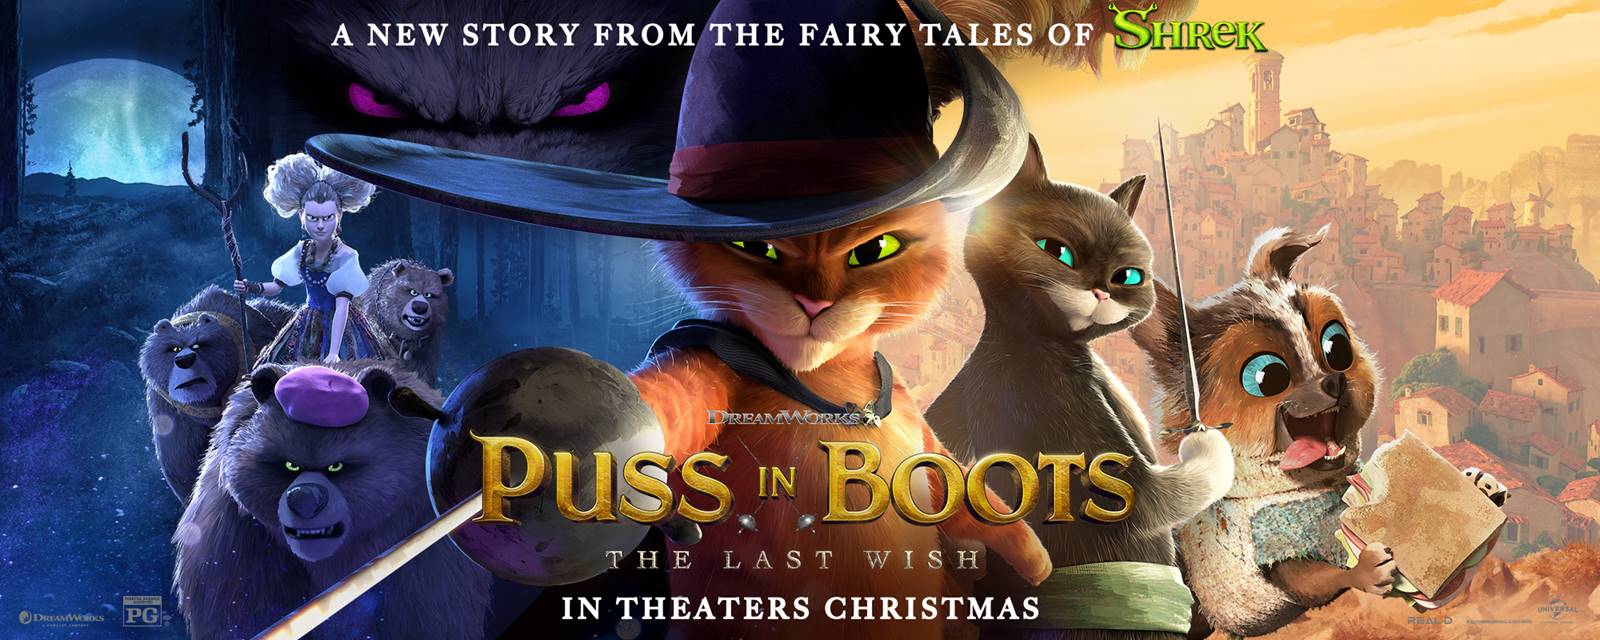 Puss in Boots: The Last Wish - Early Screening